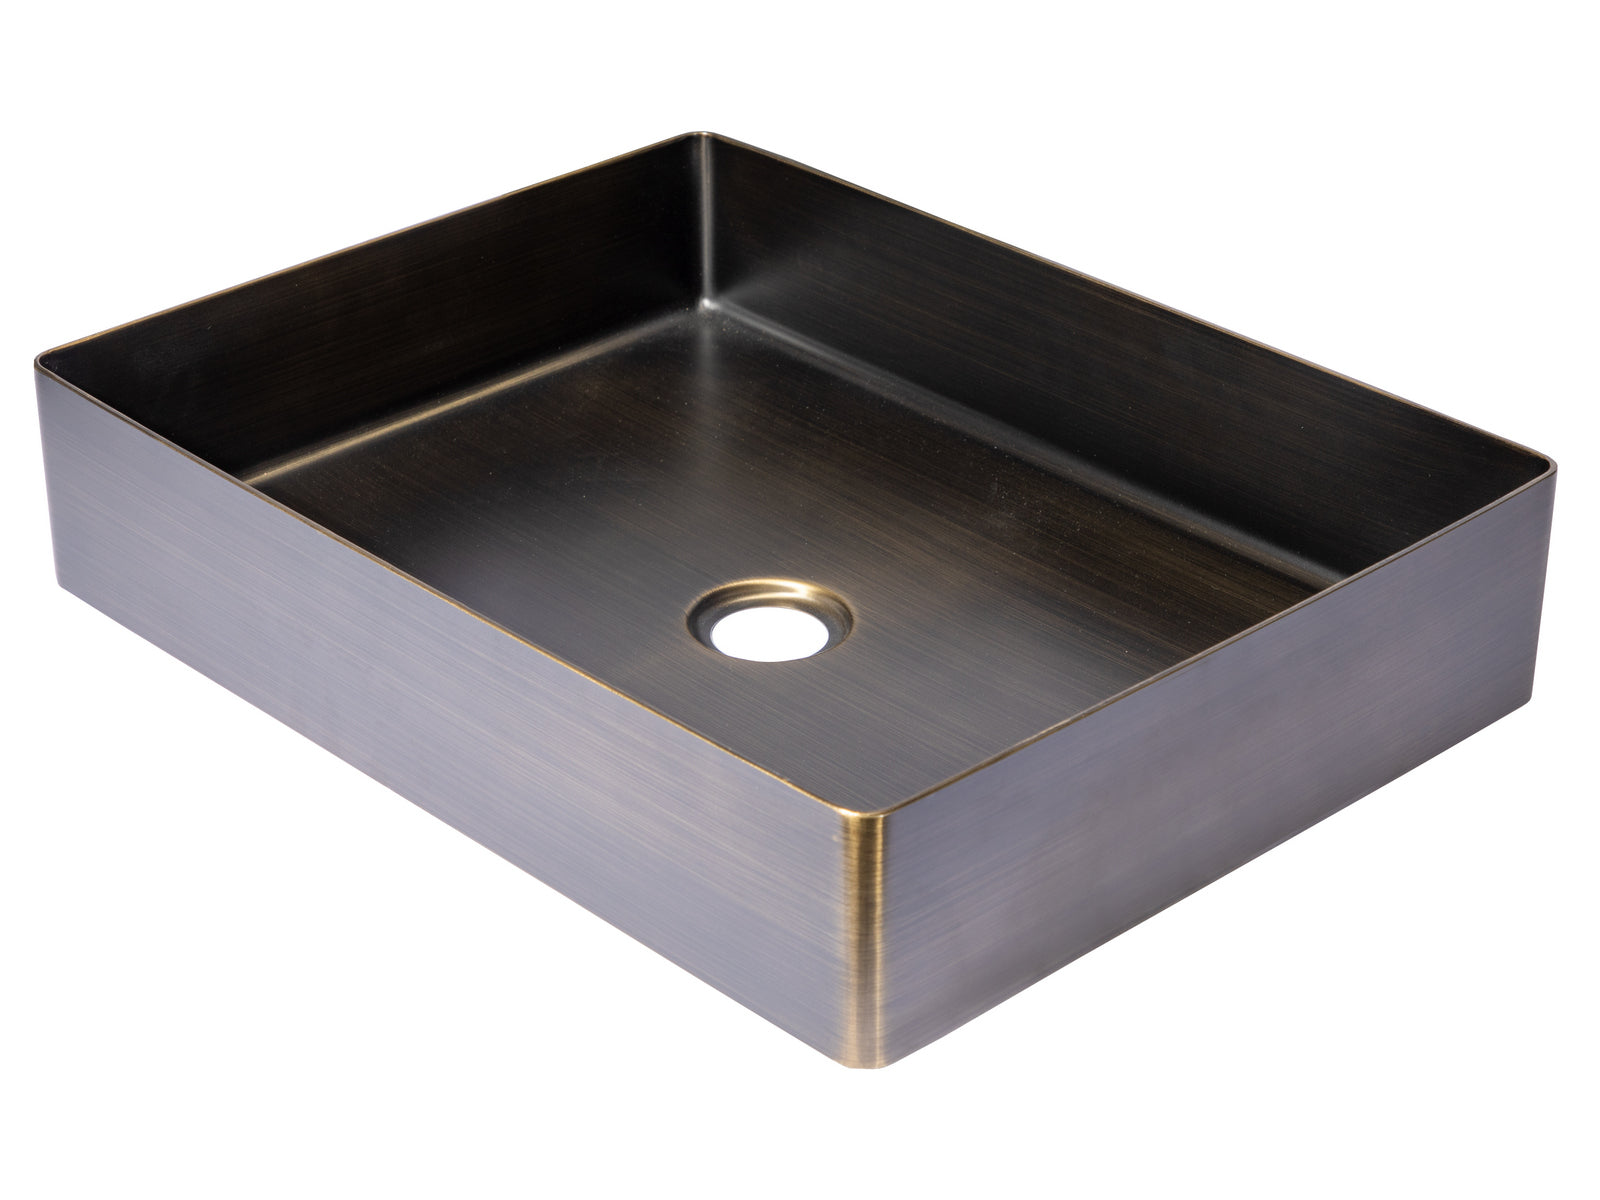 Rectangular 19" x 14 1/2" Stainless Steel Bathroom Vessel Sink with Drain in Antique Gold